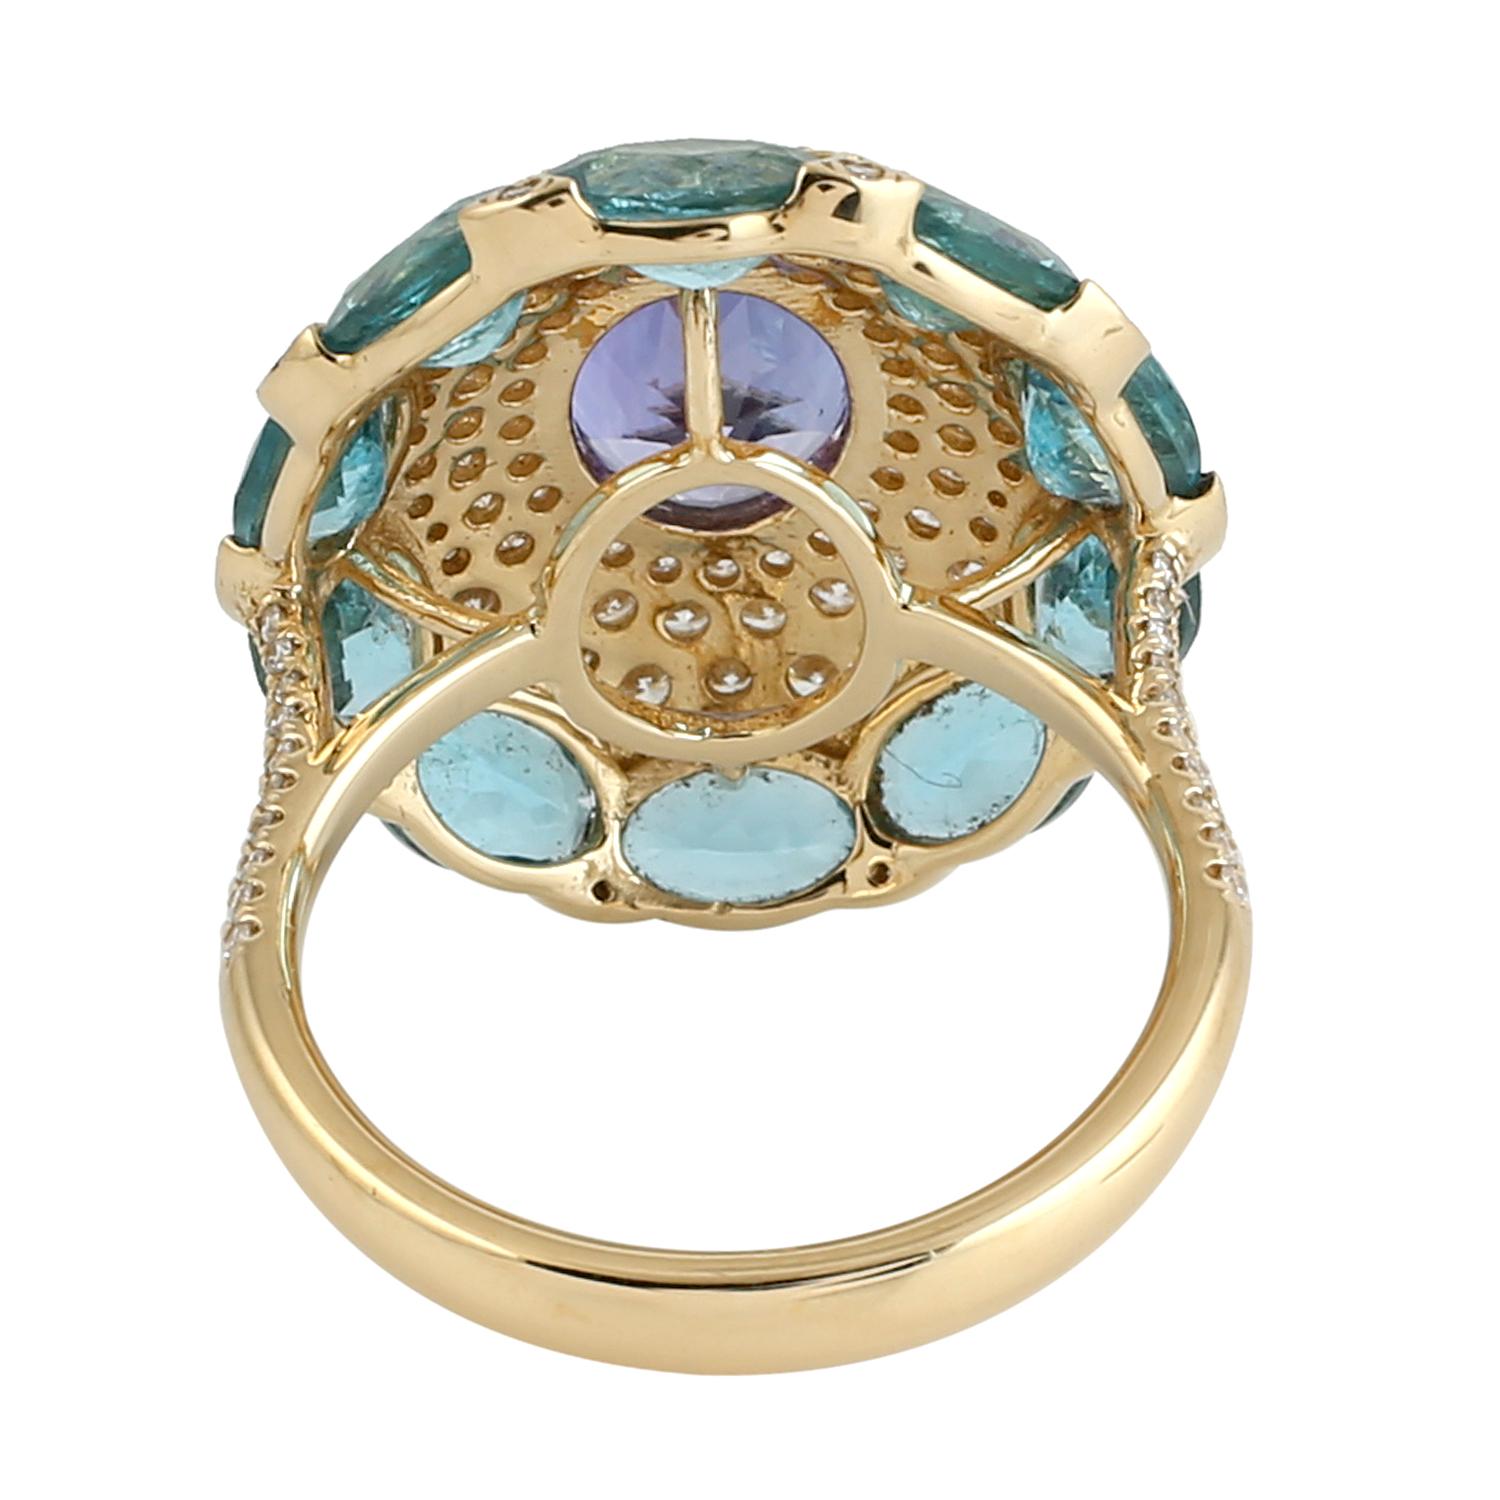 Mixed Cut Apatite & Tanzanite Cocktail Ring With Diamonds Made In 18k Yellow Gold For Sale